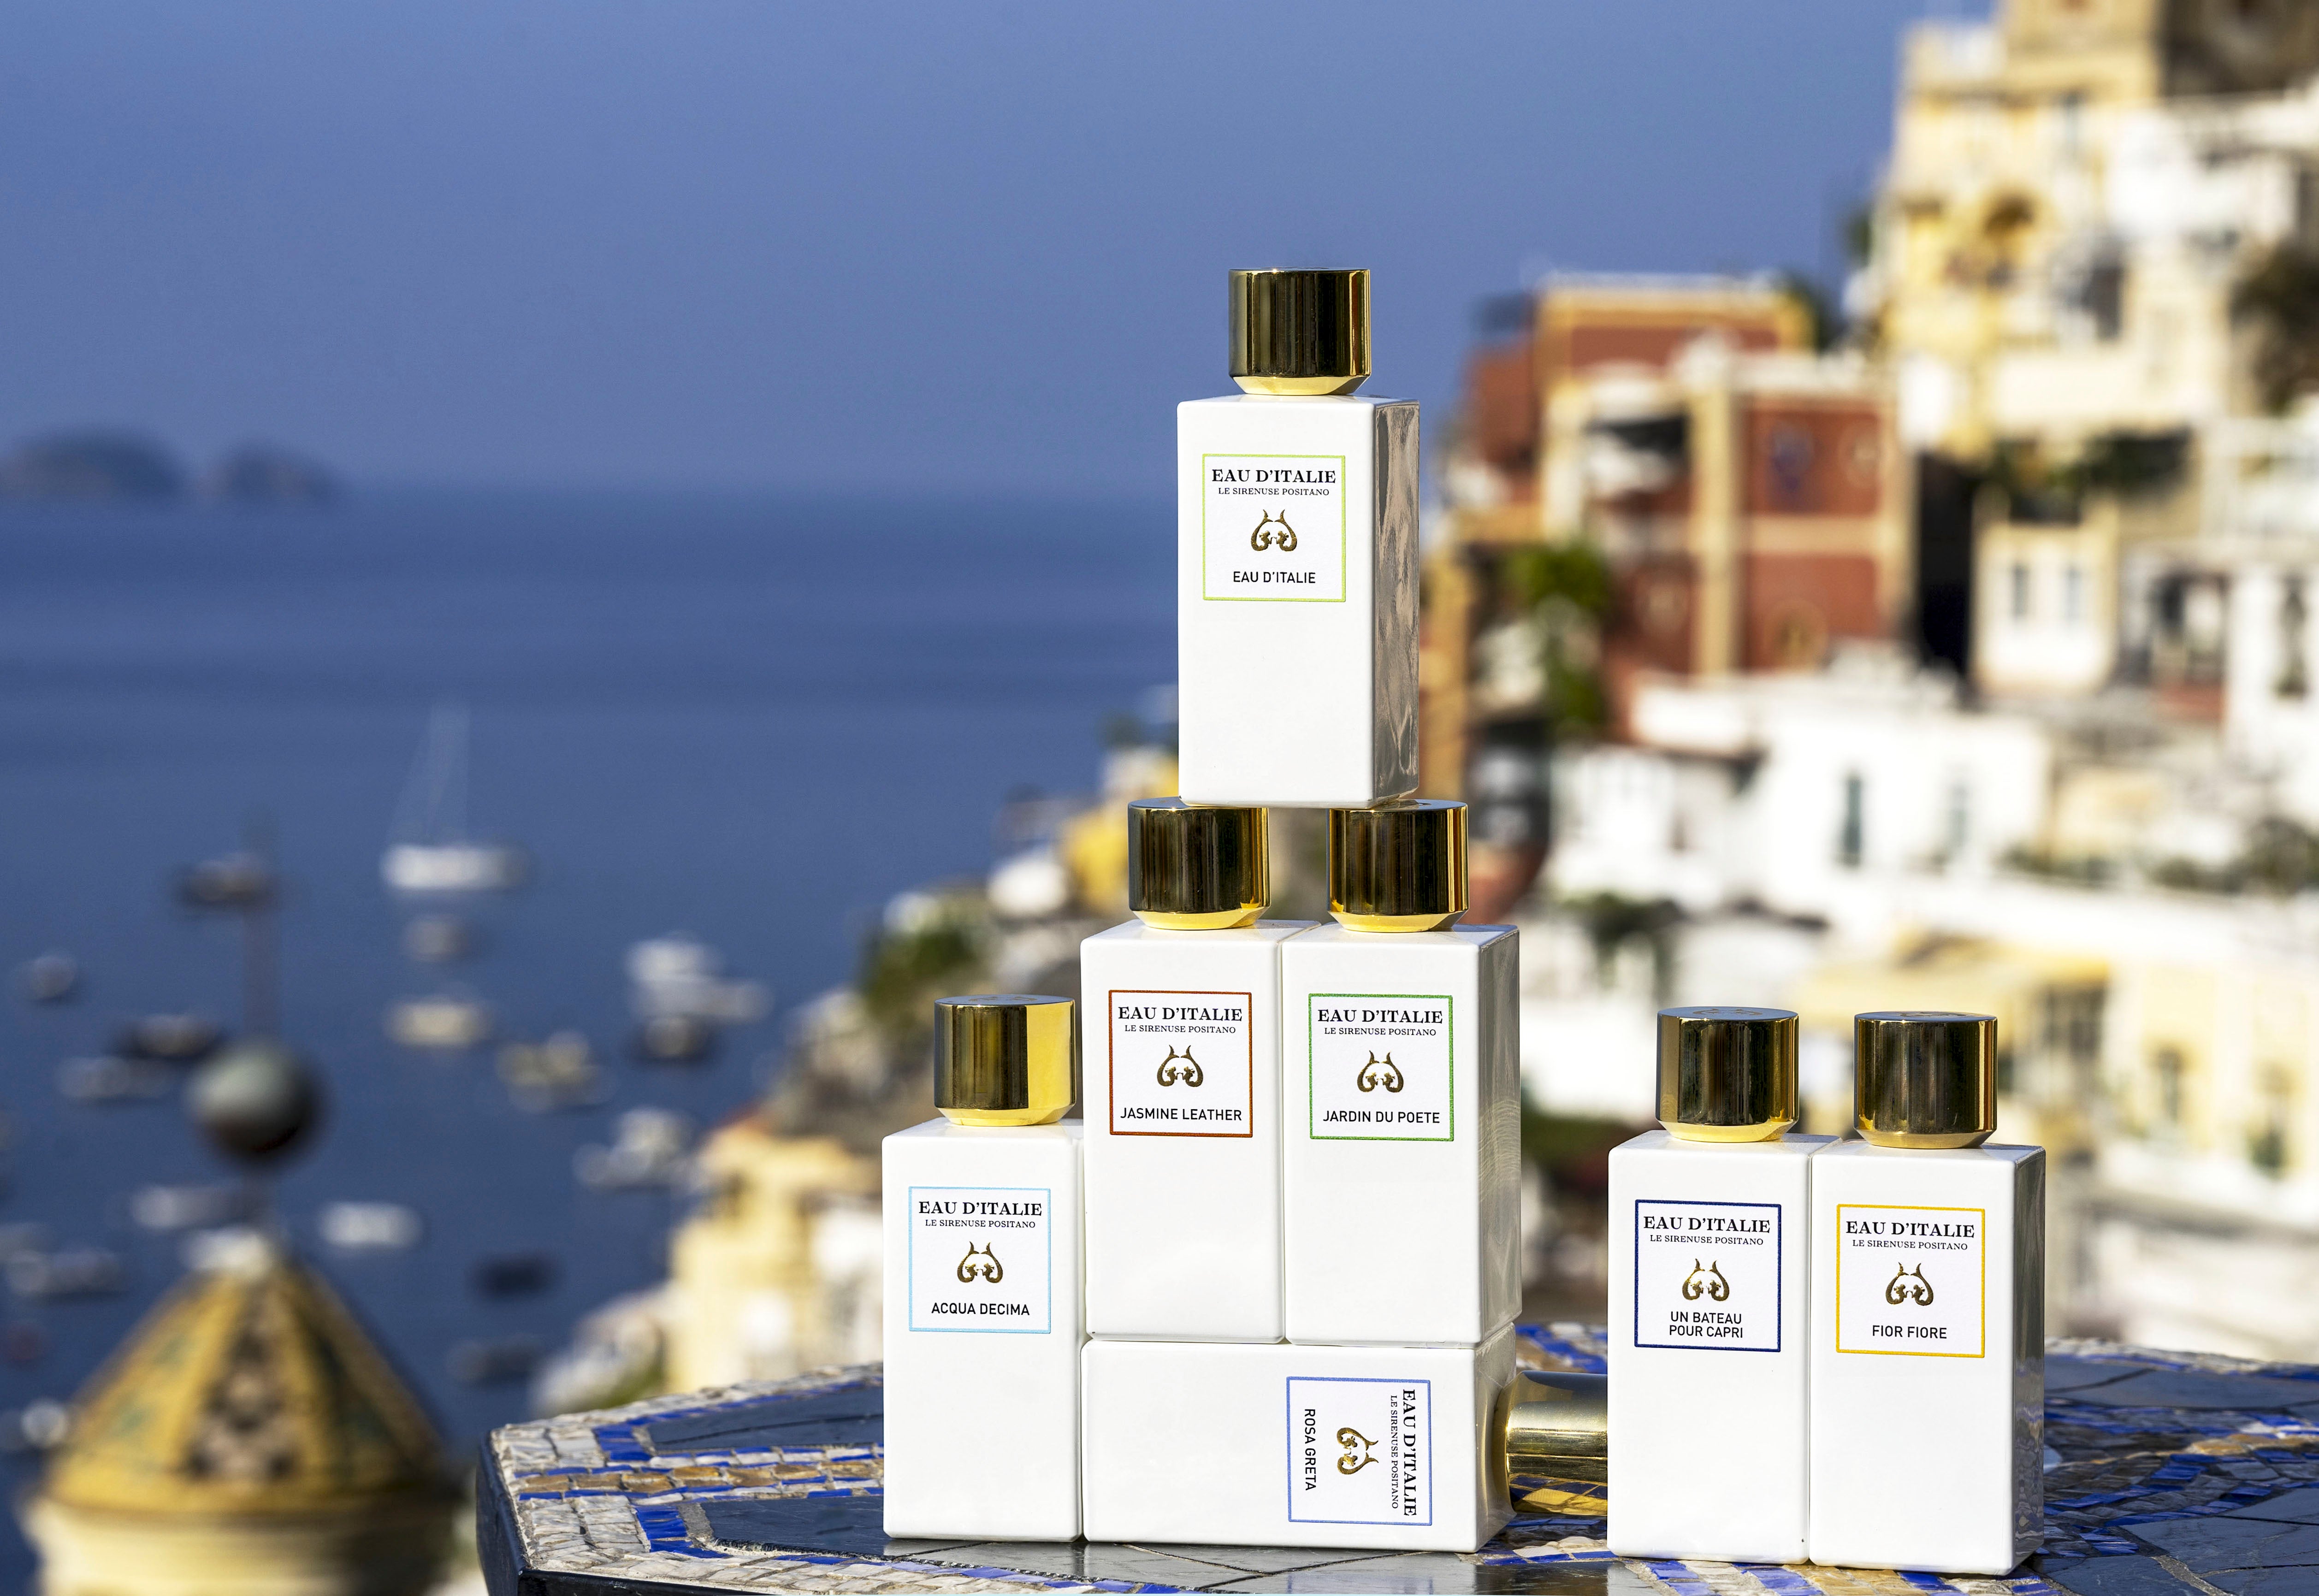 A selection of Eau d'Italie fragrances with the Positano hillside and ocean in the background